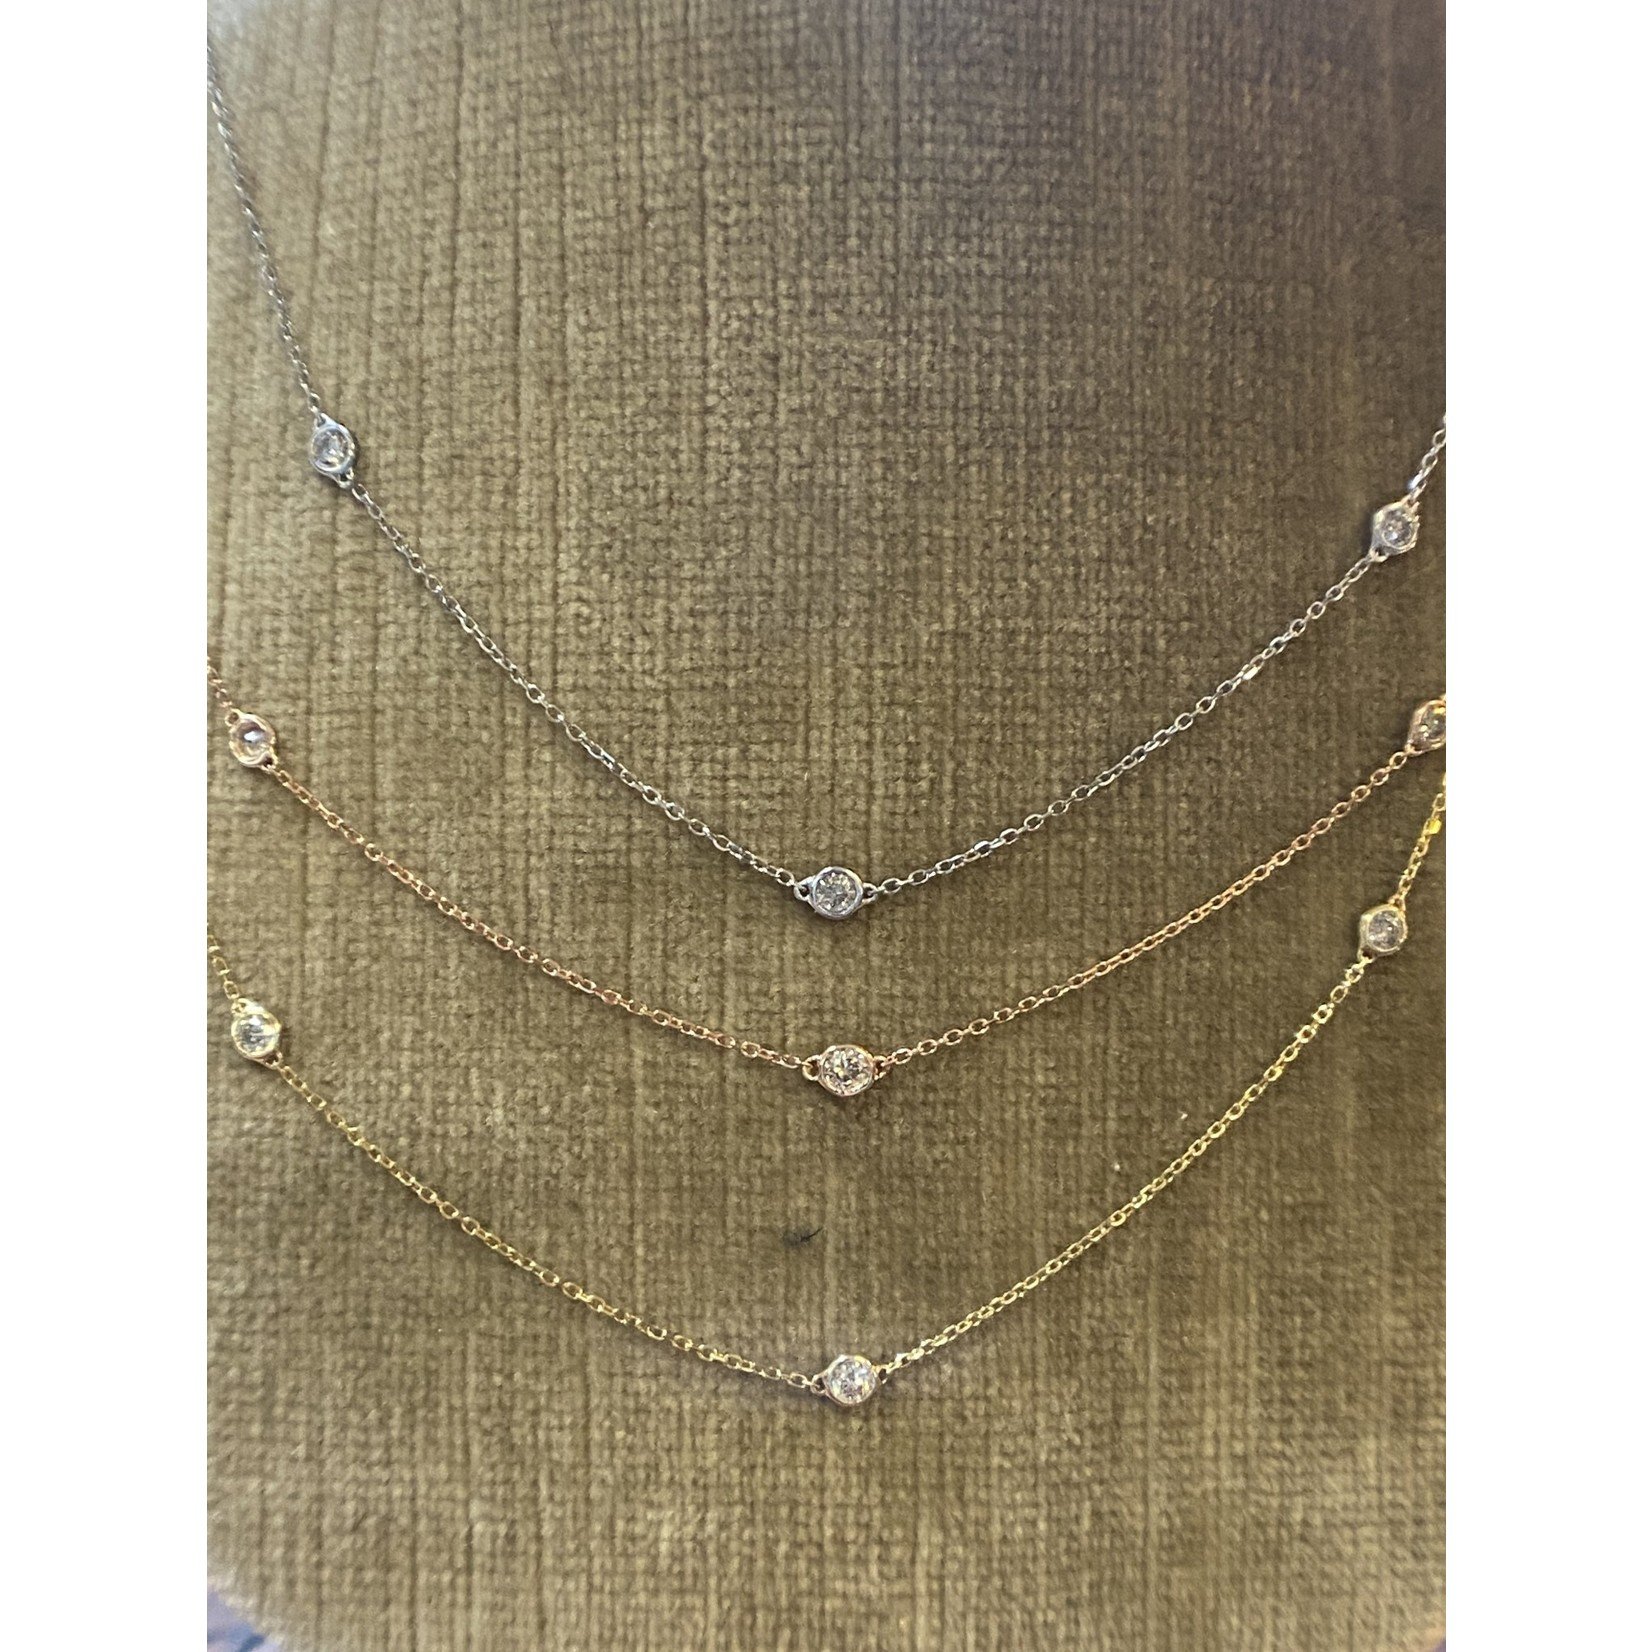 RDI So Me Designs Diamond 14k yellow gold station necklace .25 ct total weight